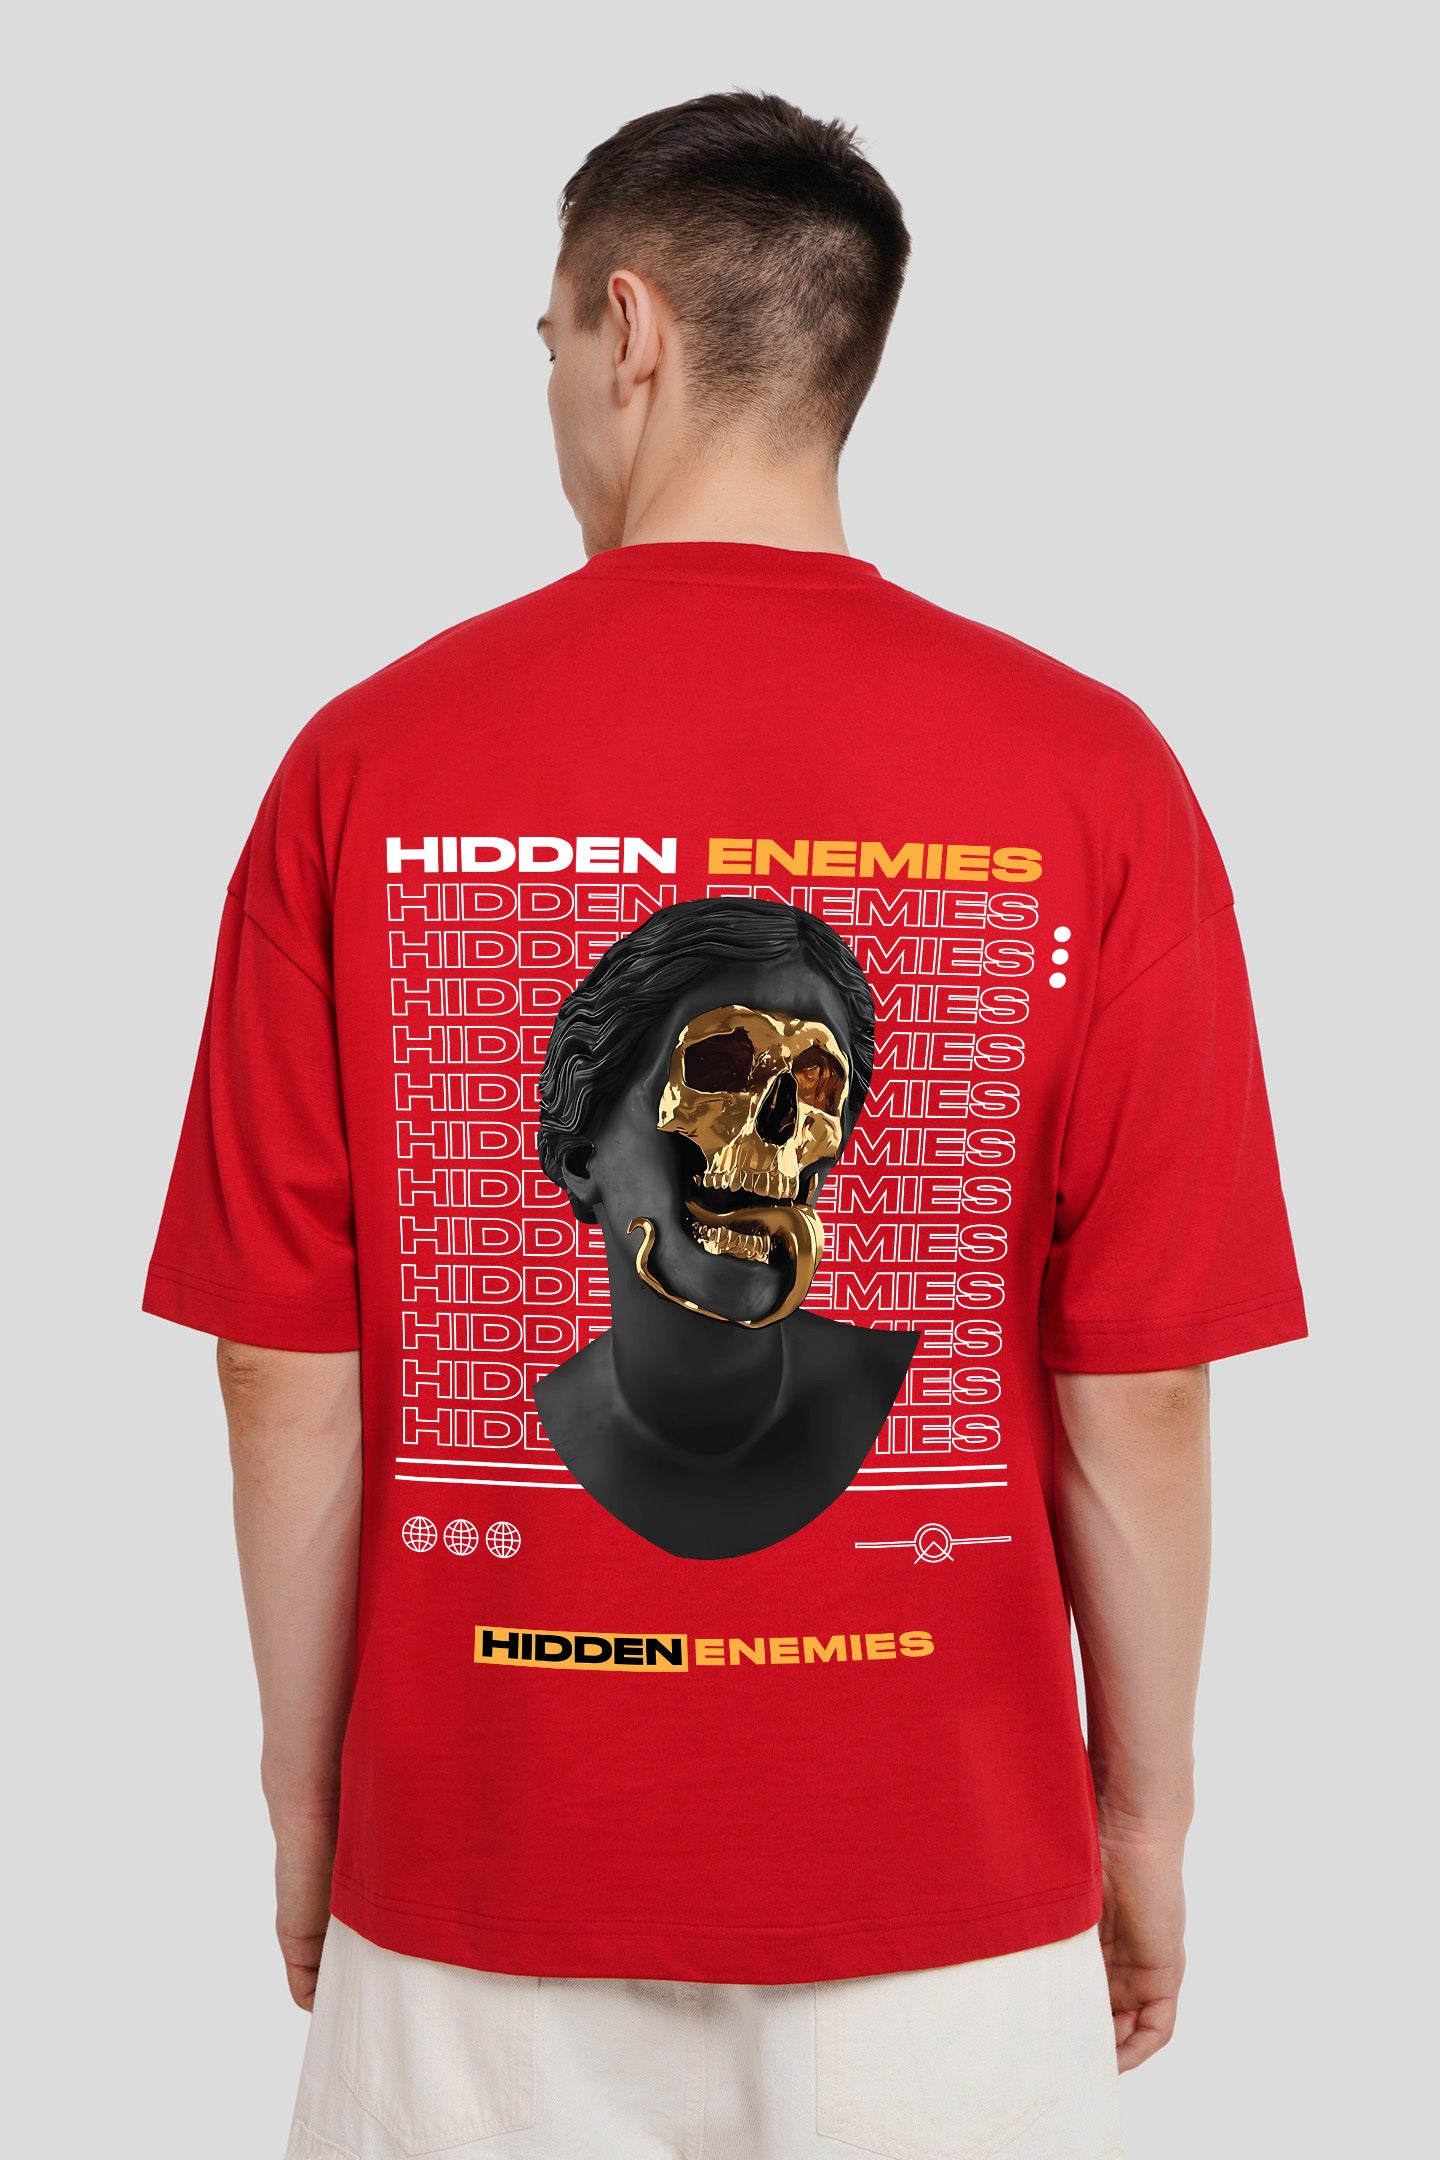 Hidden Enemies Red Printed T Shirt Men Baggy Fit With Front And Back Design Pic 2